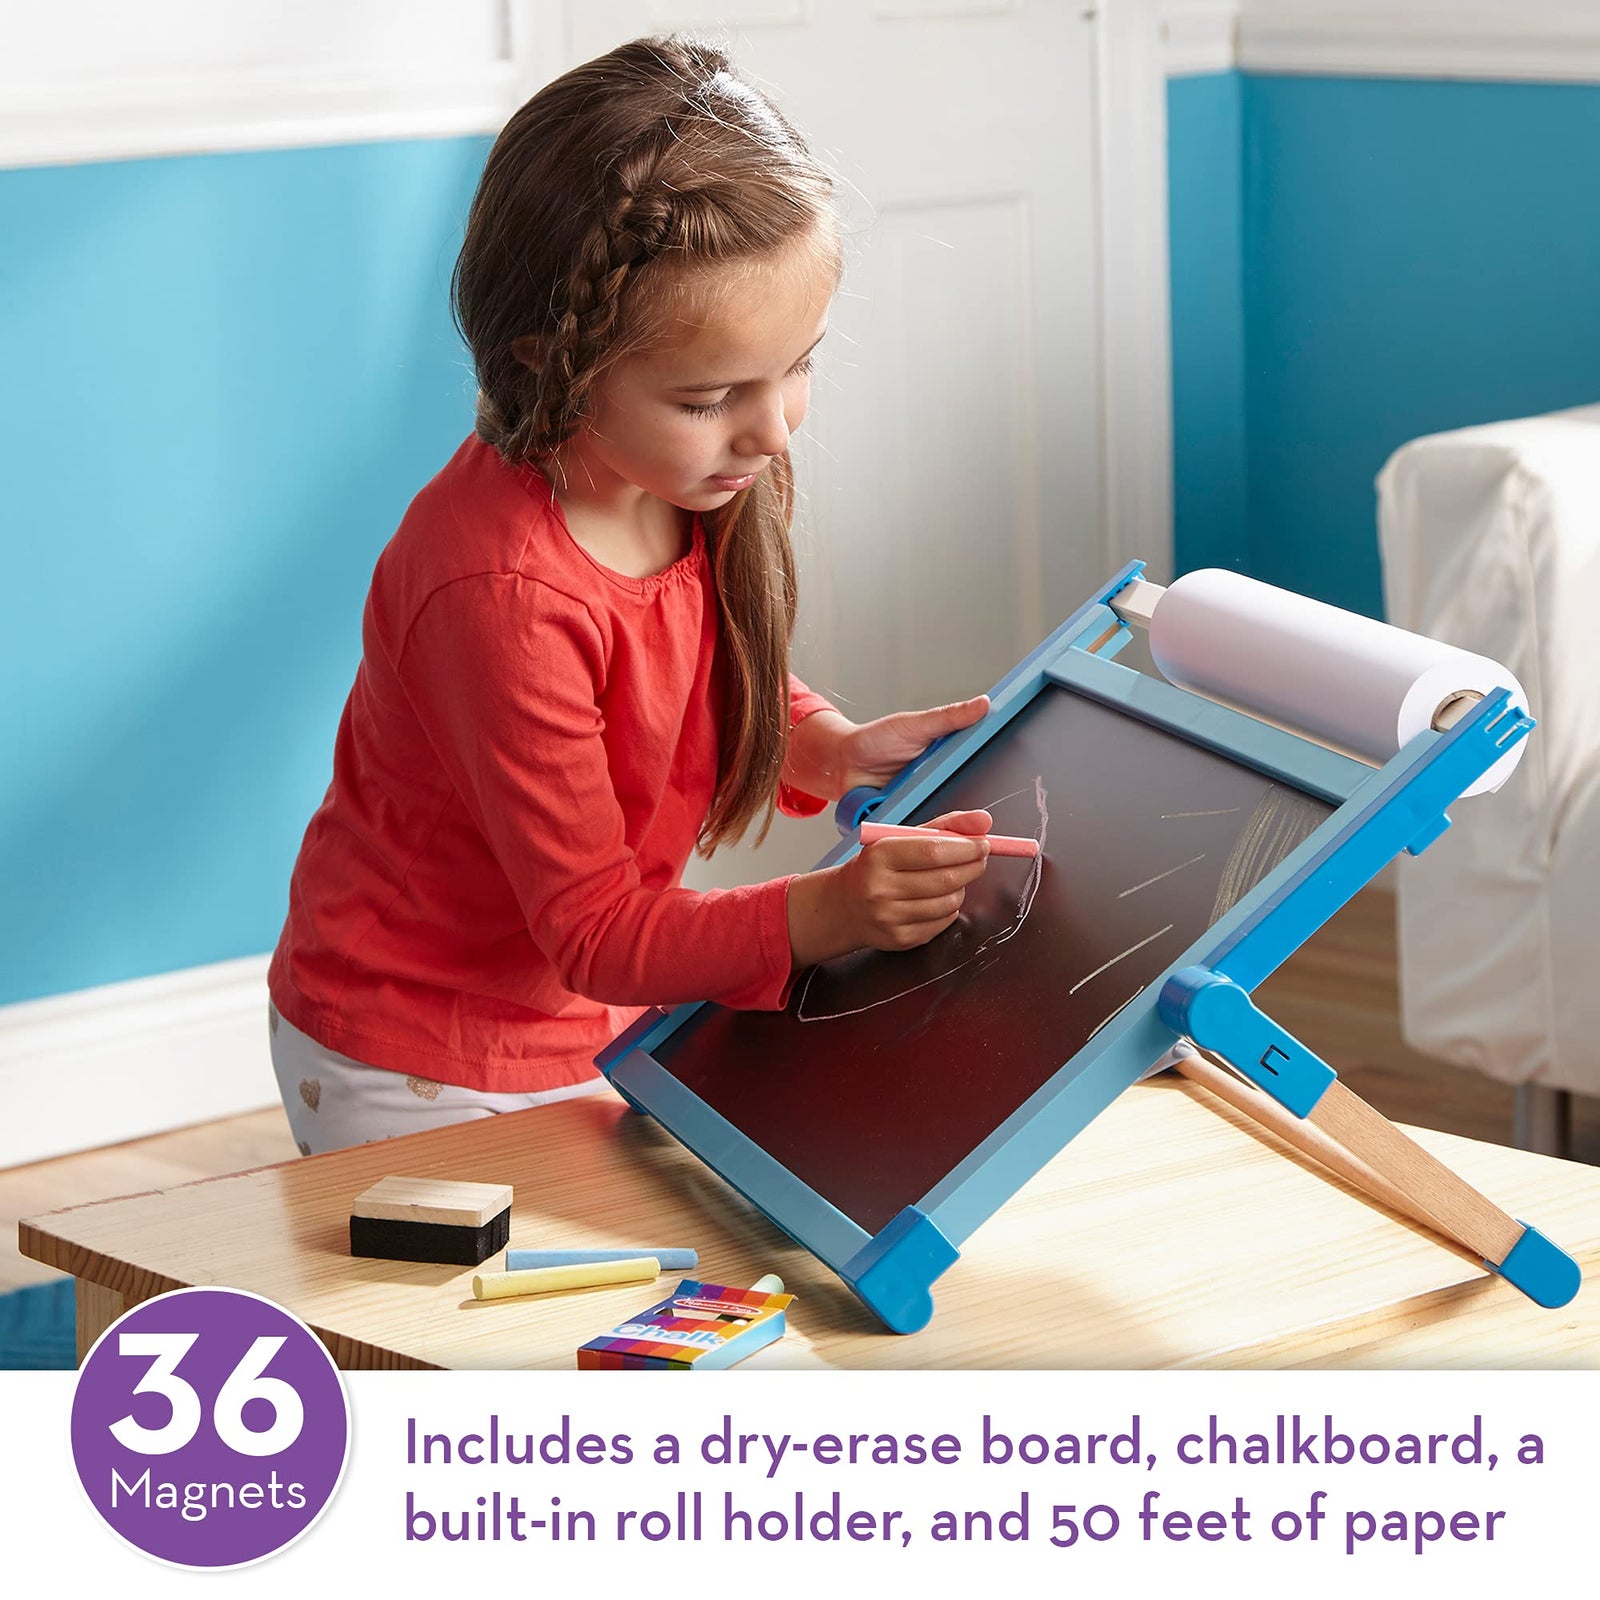 Melissa & Doug Deluxe Double-Sided Tabletop Easel (E-Commerce Packaging, Arts & Crafts, 42 Pieces, 17.5” H x 20.75” W x 2.75” L, Great Gift for Girls and Boys - Best for 3, 4, 5 Year Olds and Up)